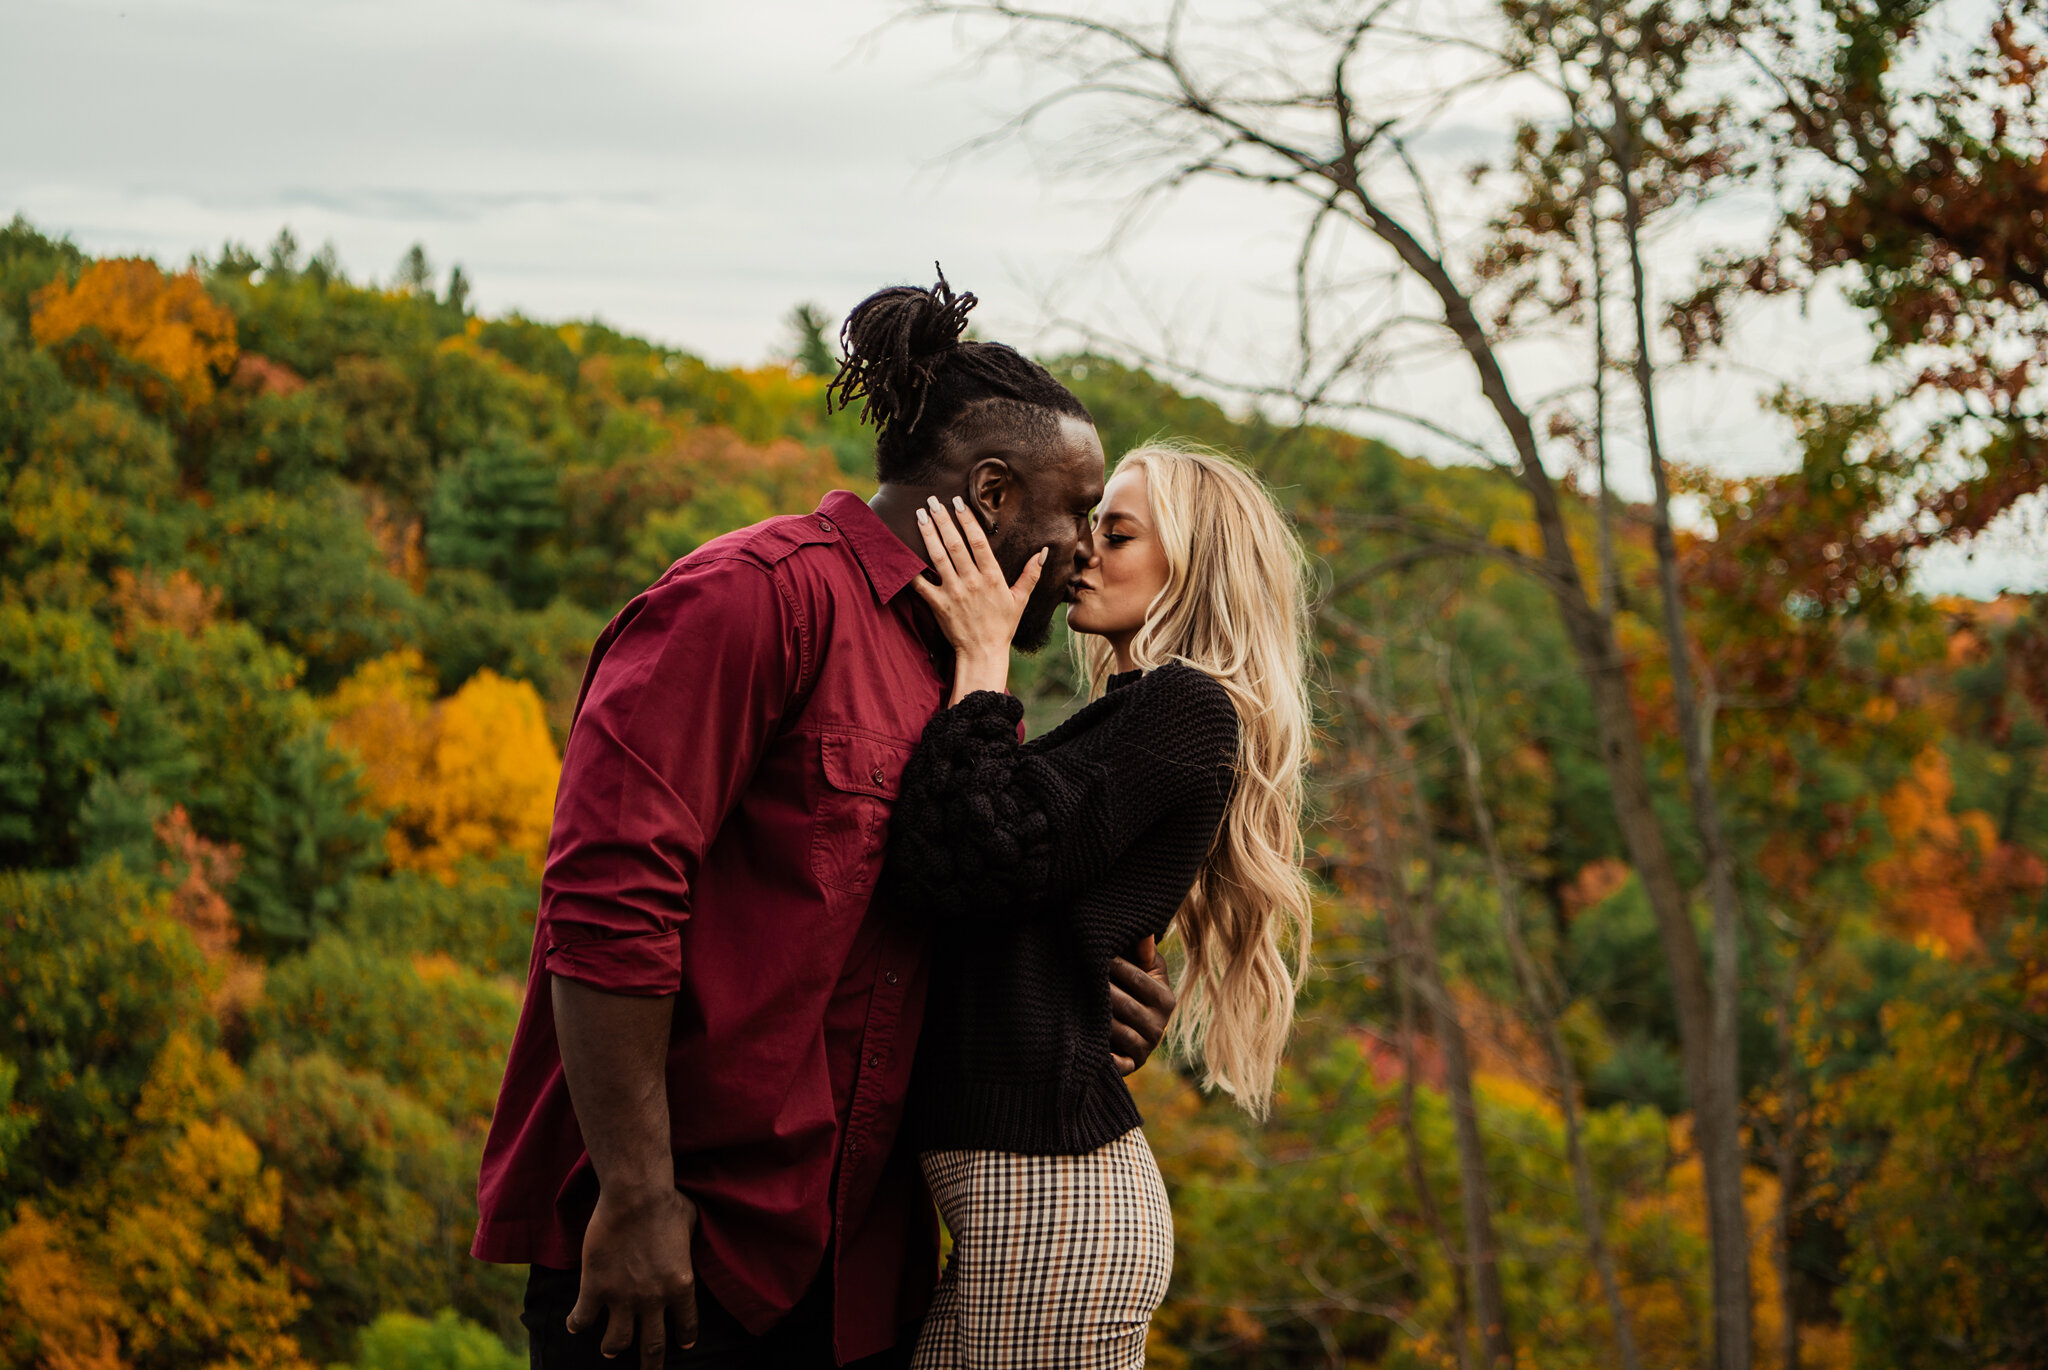 Letchworth_State_Park_Rochester_Couples_Session_JILL_STUDIO_Rochester_NY_Photographer_9428.jpg